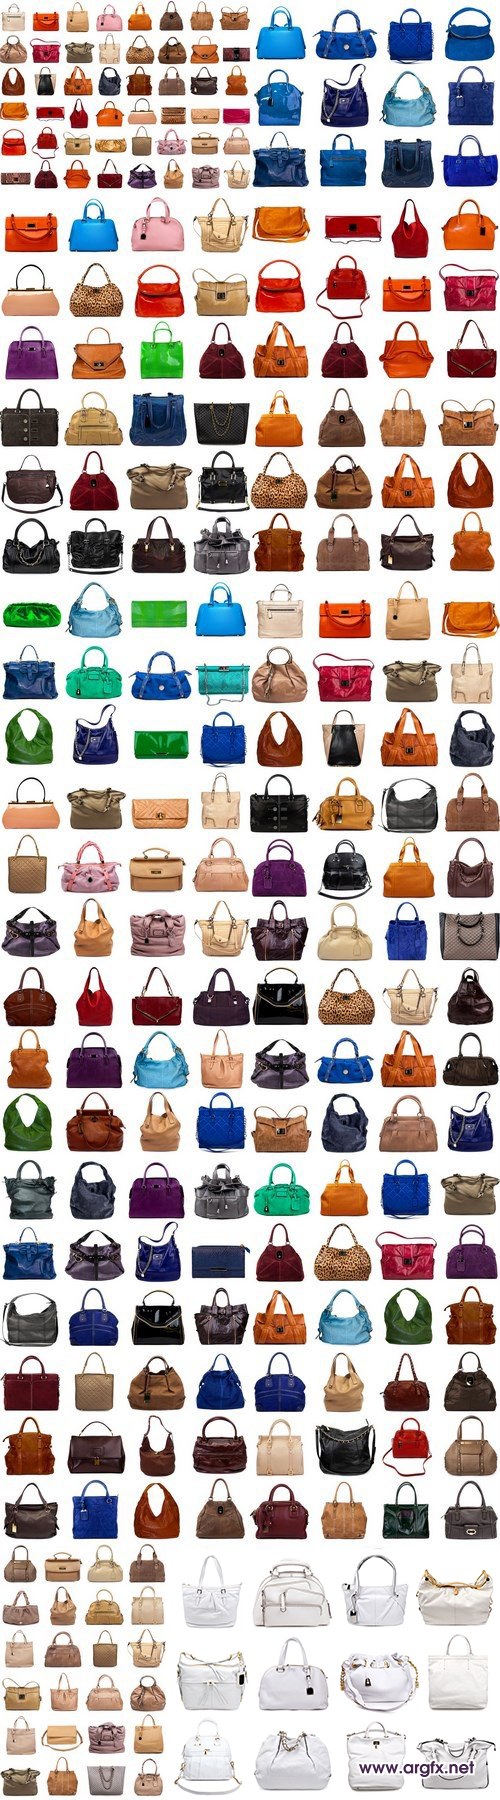  Collection of multicolored female bags - 19xUHQ JPEG